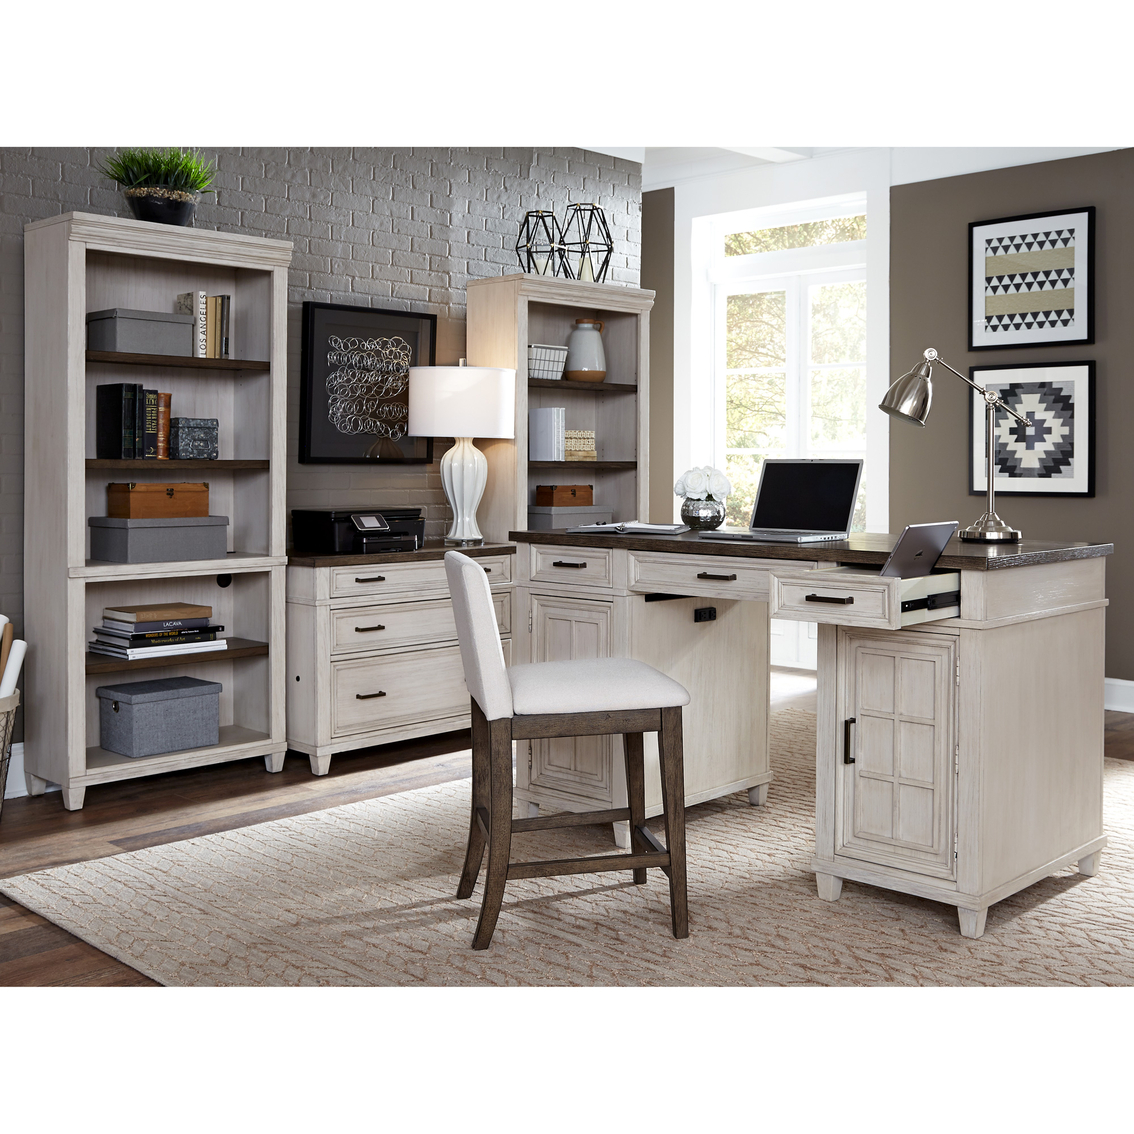 Aspenhome Caraway Lateral File Cabinet - Image 5 of 5